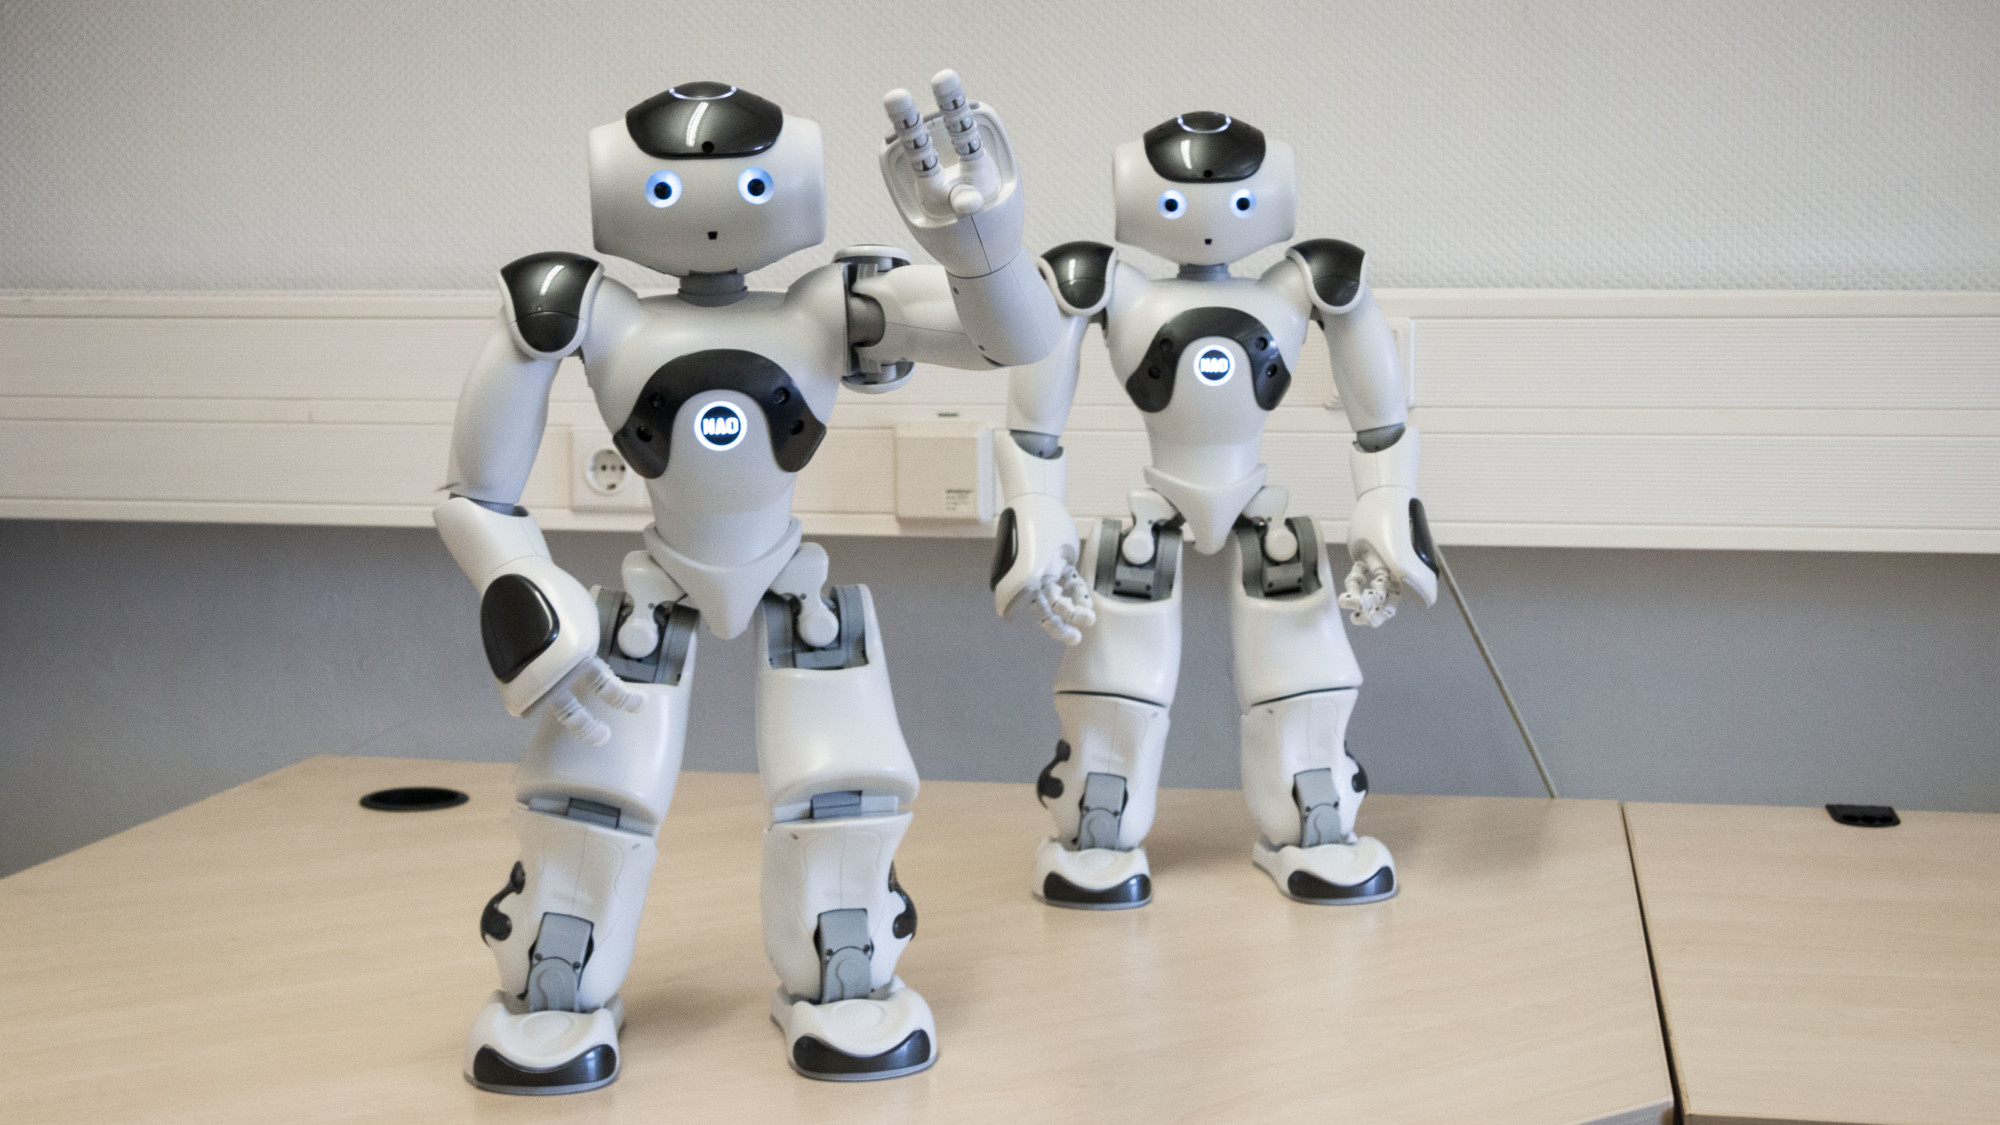 Picture of two Nao robots. One is waving